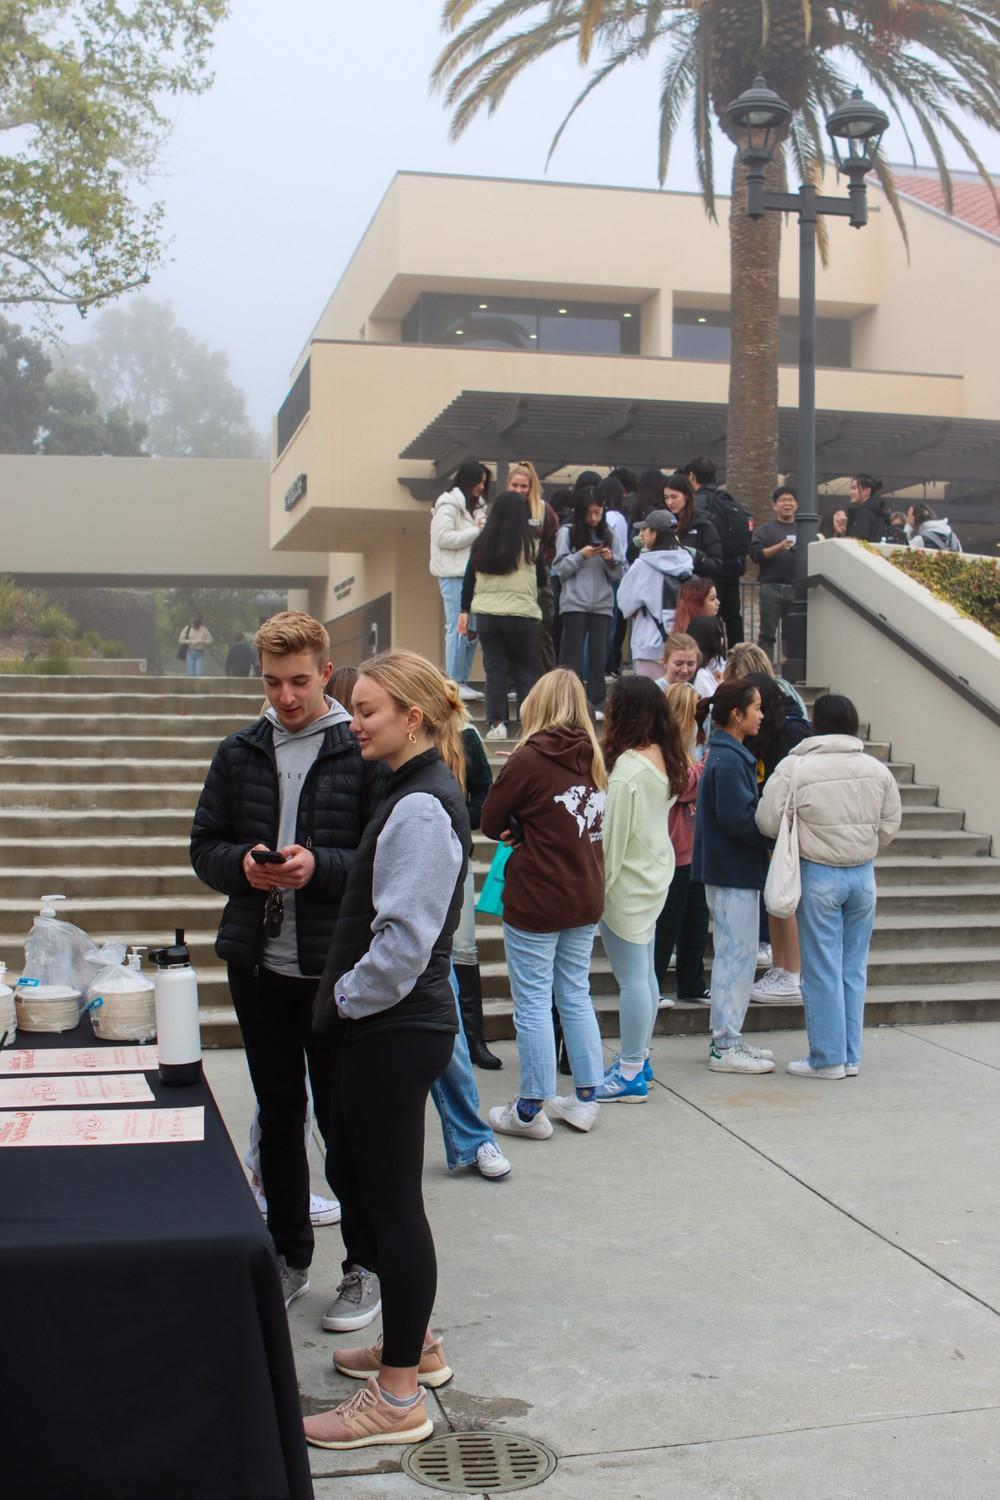 Students wait in line to check into the Global Fest Night Market by scanning a QR code on the CampusGroups website on March 11. Students who attended the Night Market had the opportunity to enter a raffle for Pepperdine-themed merchandise, Mella said.